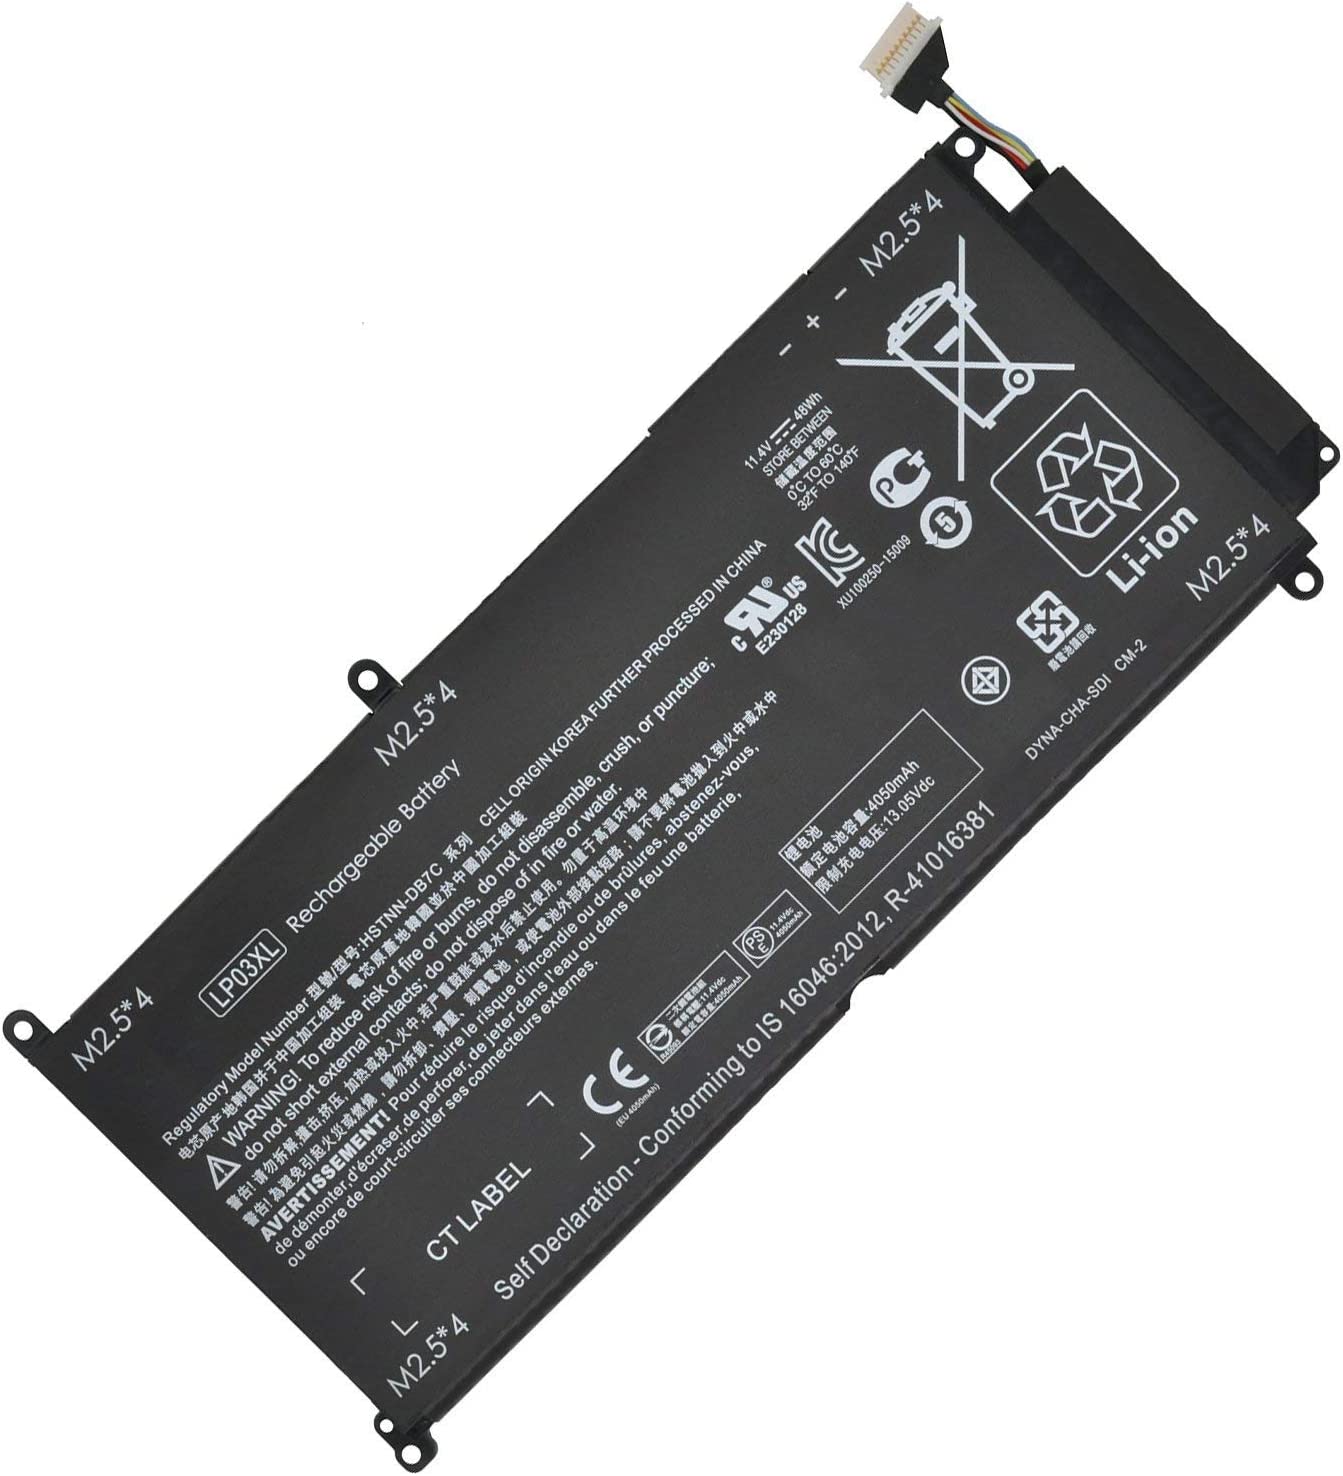 Batería para HP LP03XL HSTNN-DB7C Envy M6-P M6-P113DX M6-P 013DX 15T-AE 15T-AE000(compatible)